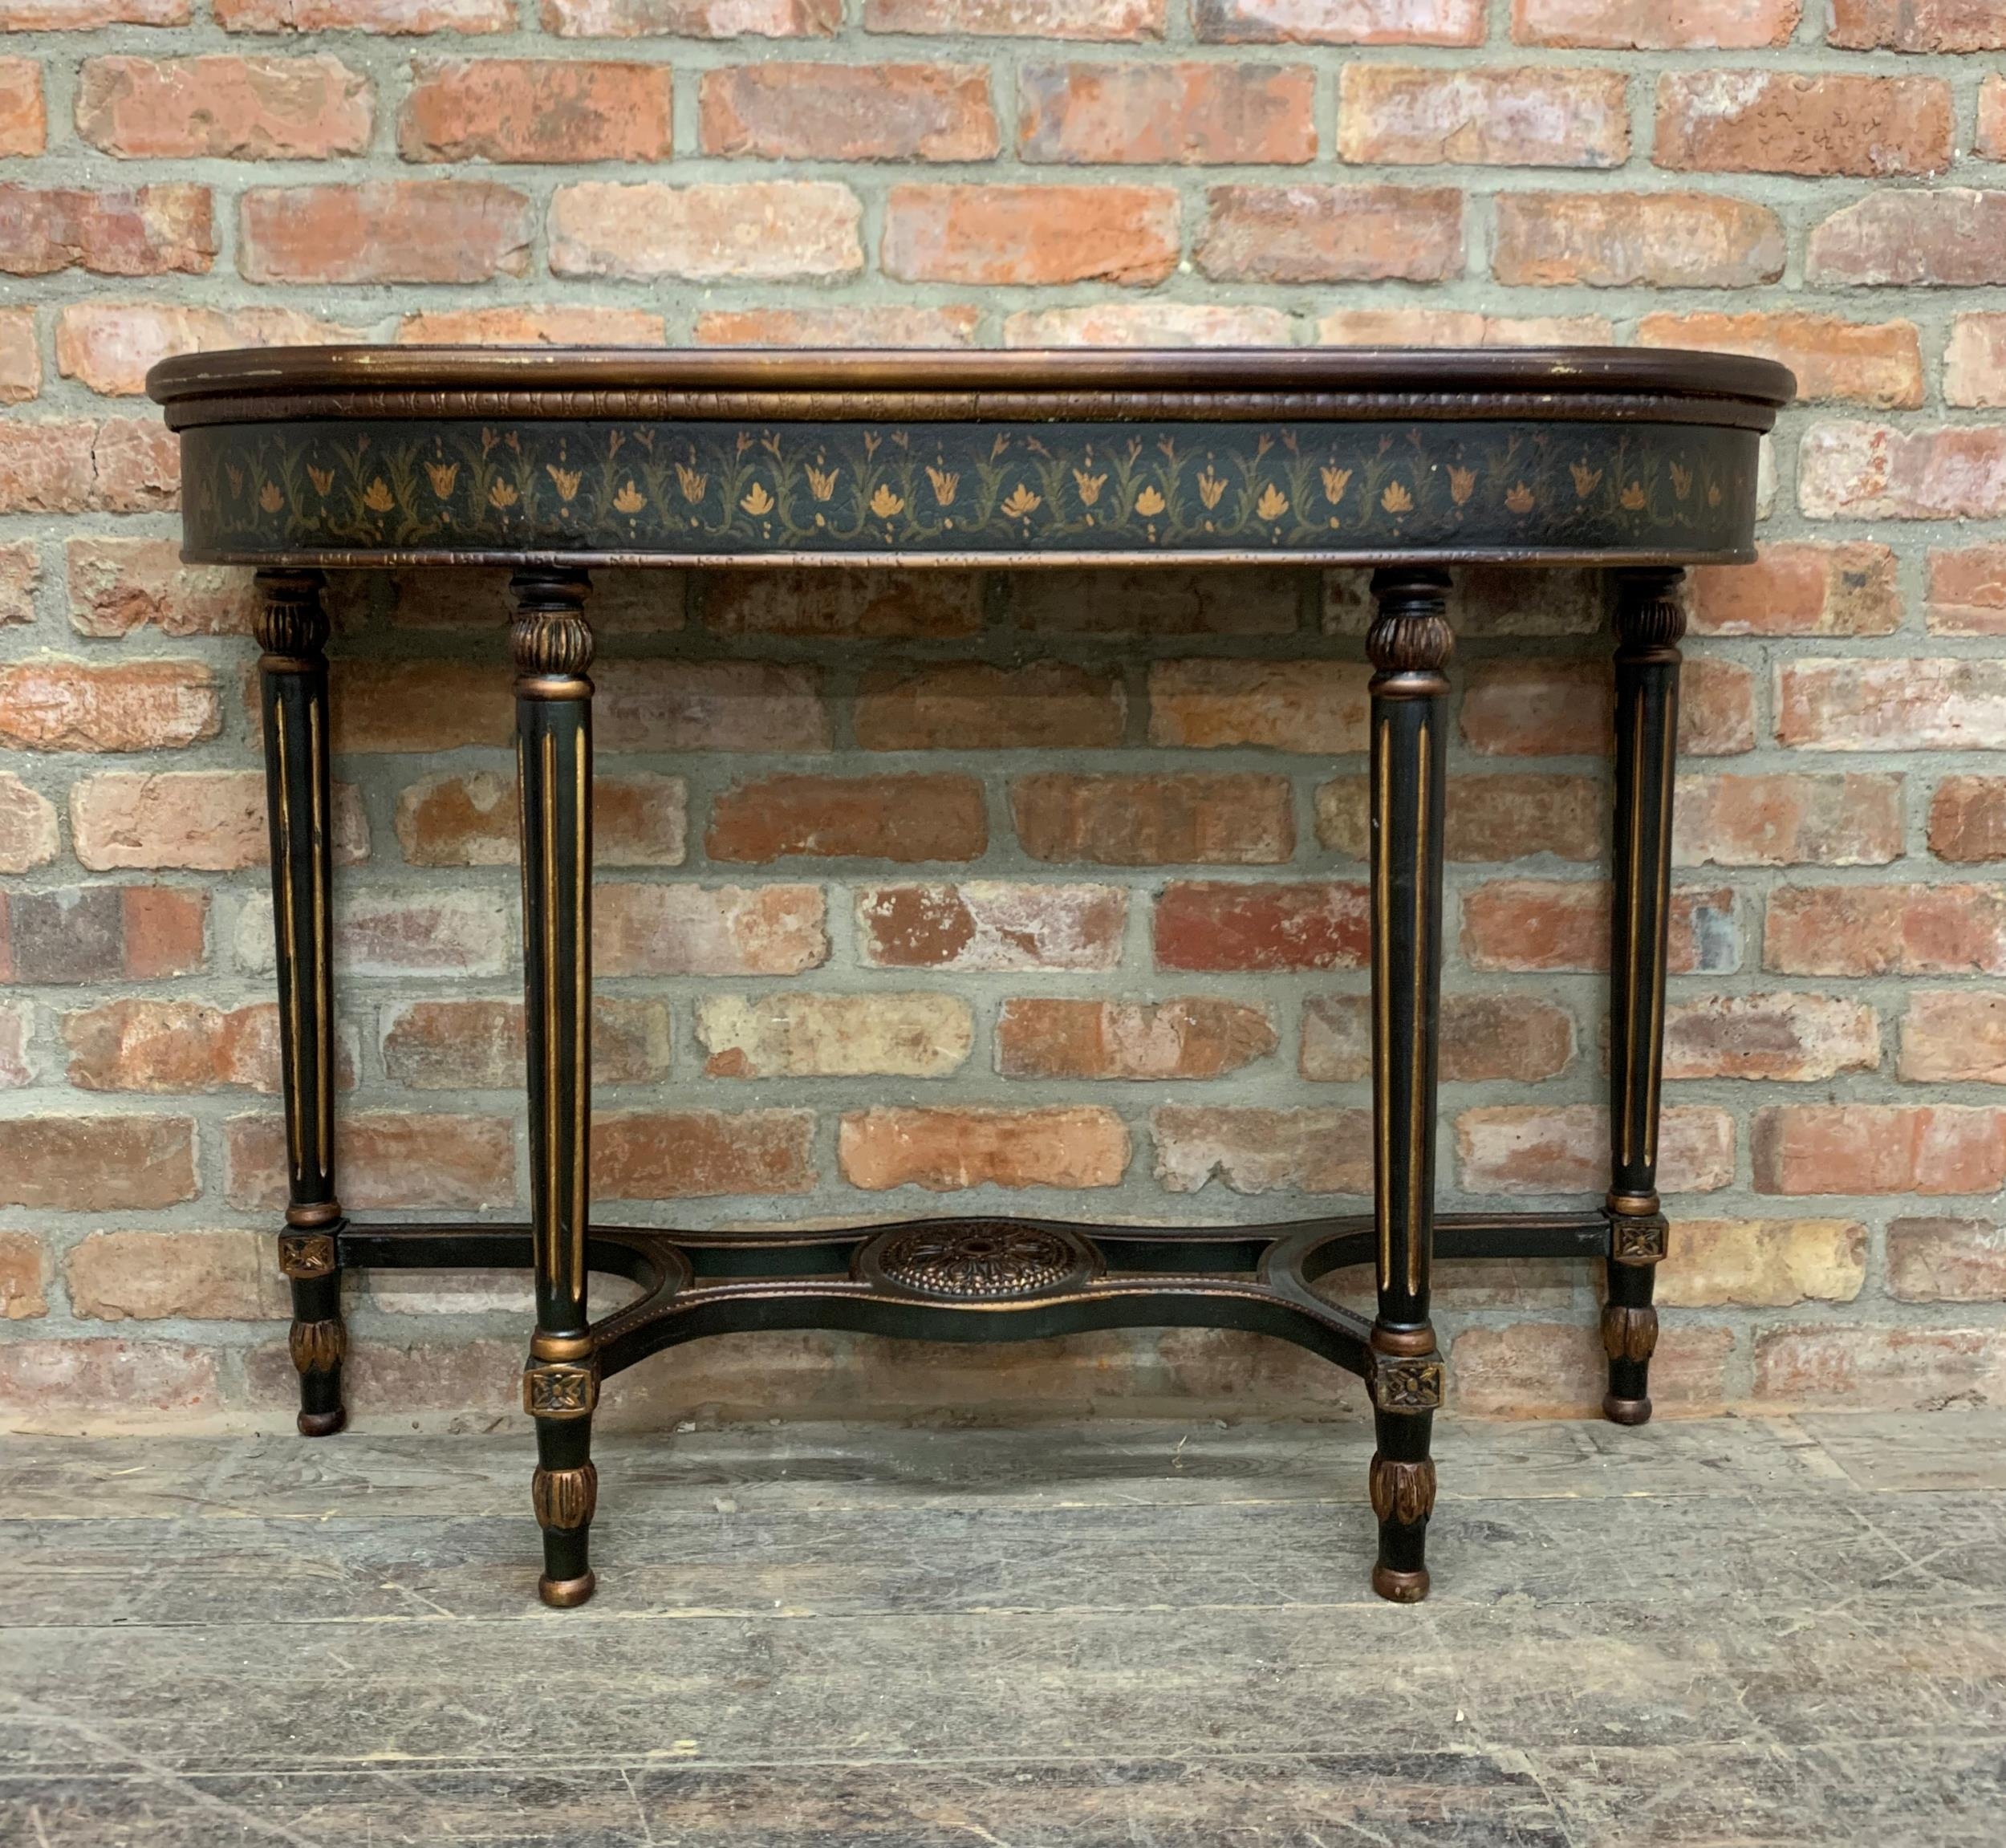 Well painted antique style d-end console table, H 82cm x W 115cm